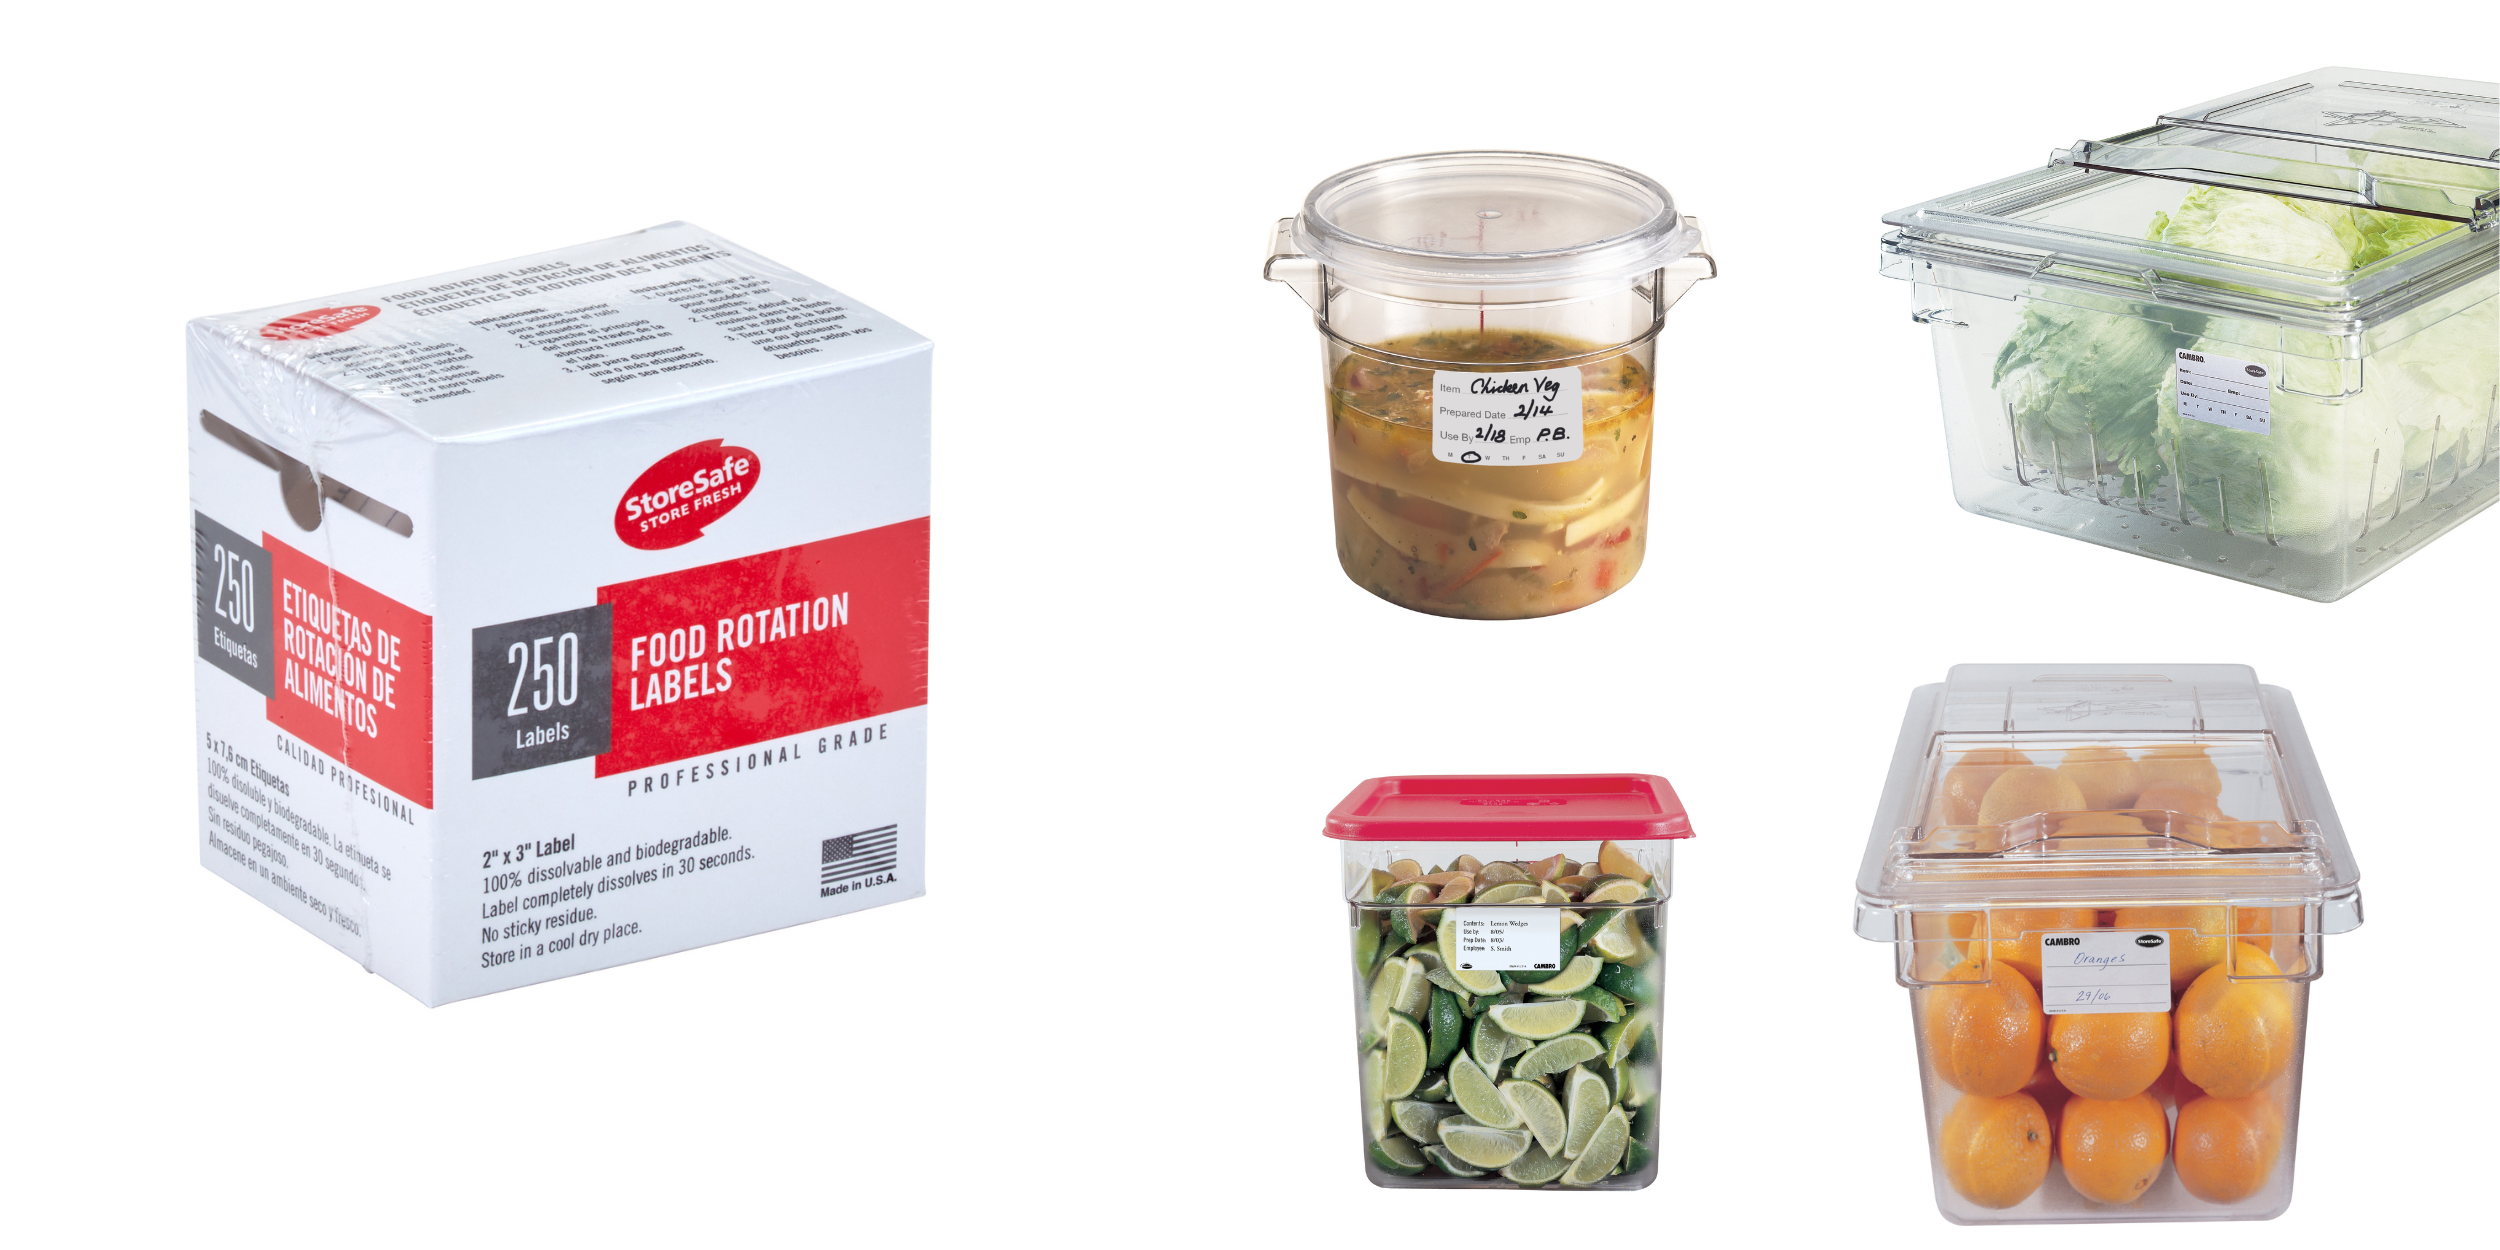 Using labels on food storage containers